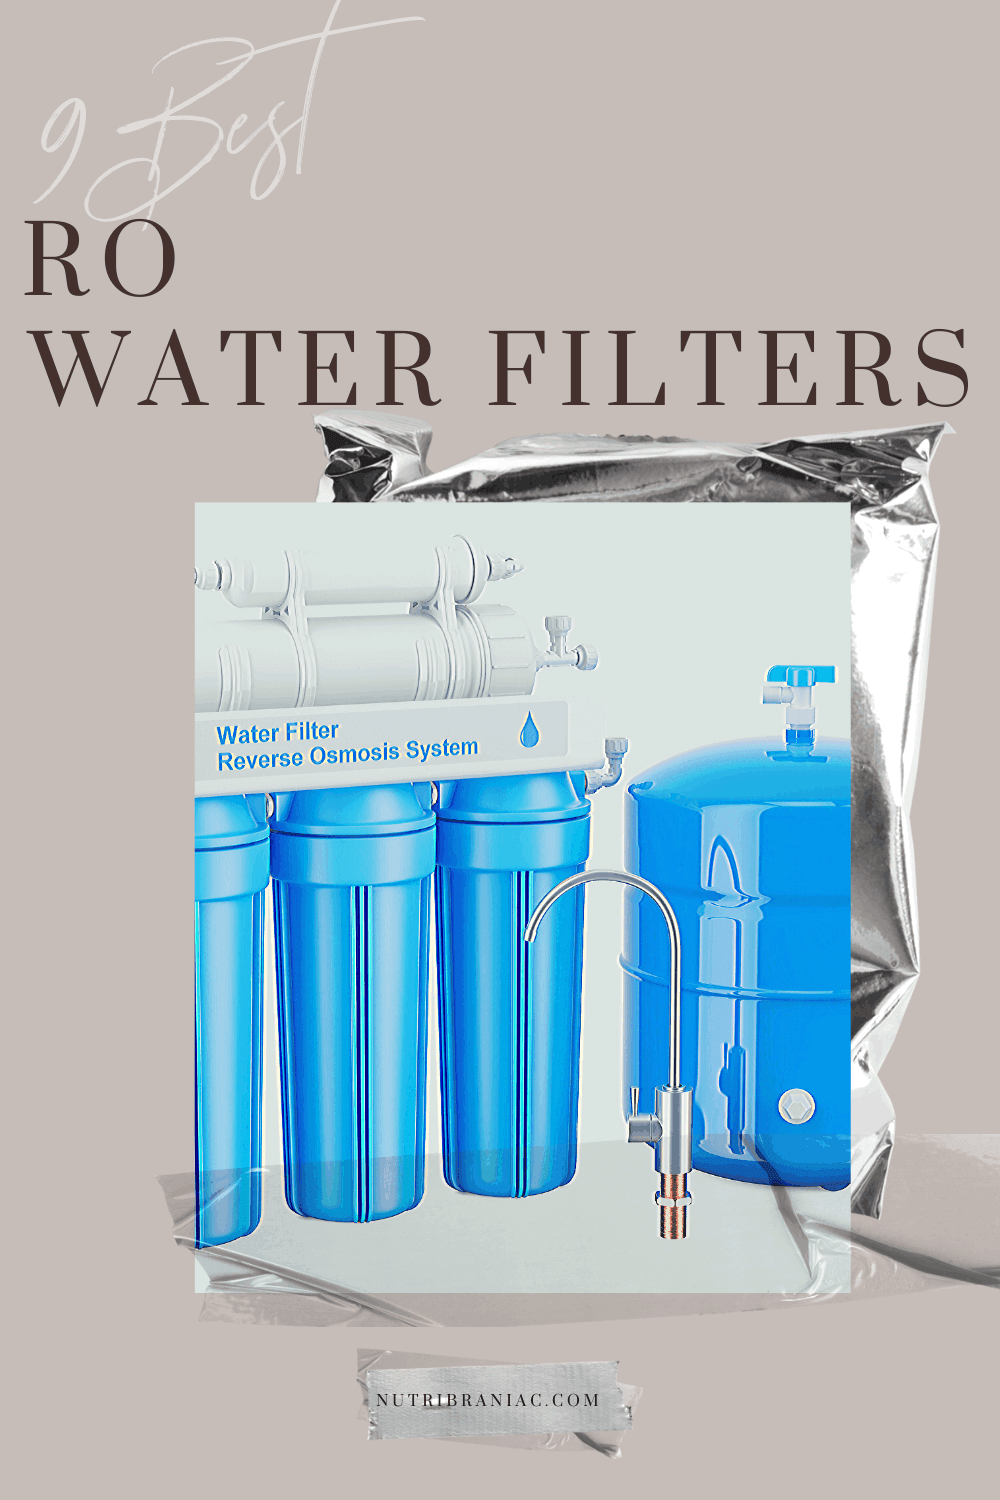 photograph of a blue reverse osmosis water filter system with text overlay, "9 Best RO Water Filters"